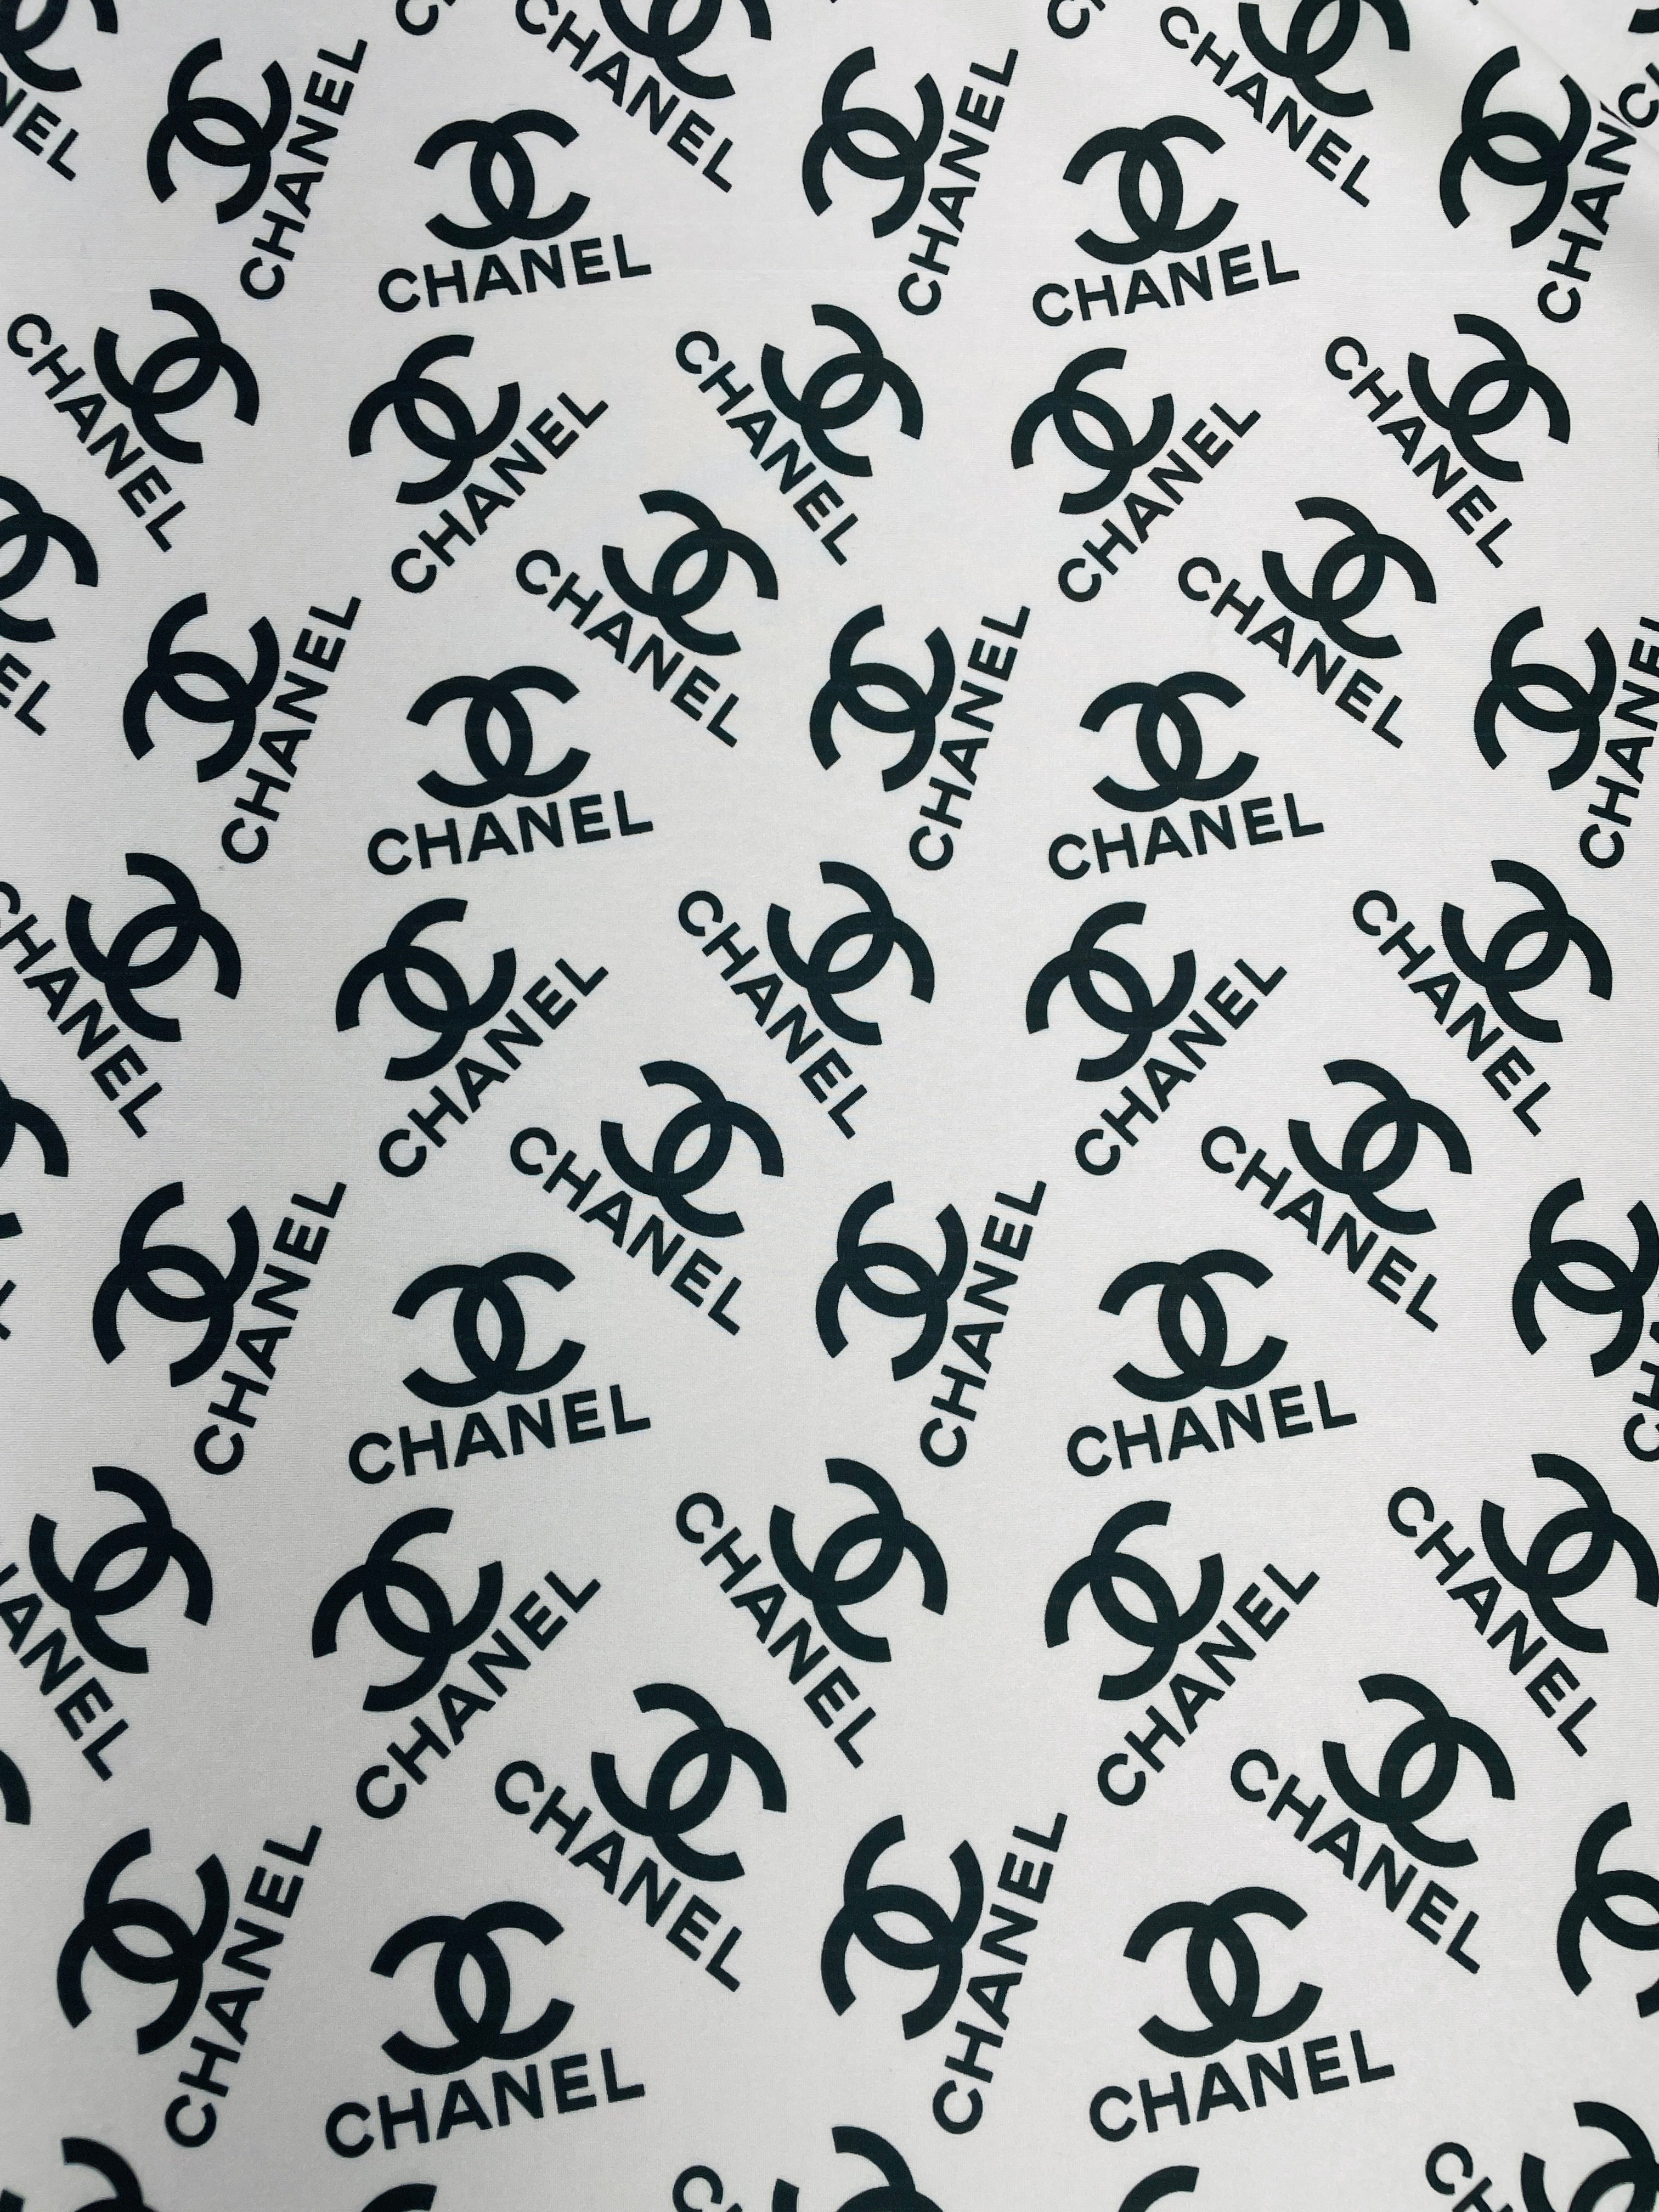 Chanel Logo Offset Printing Fabrics HXYH5378 for Shirts, Tops